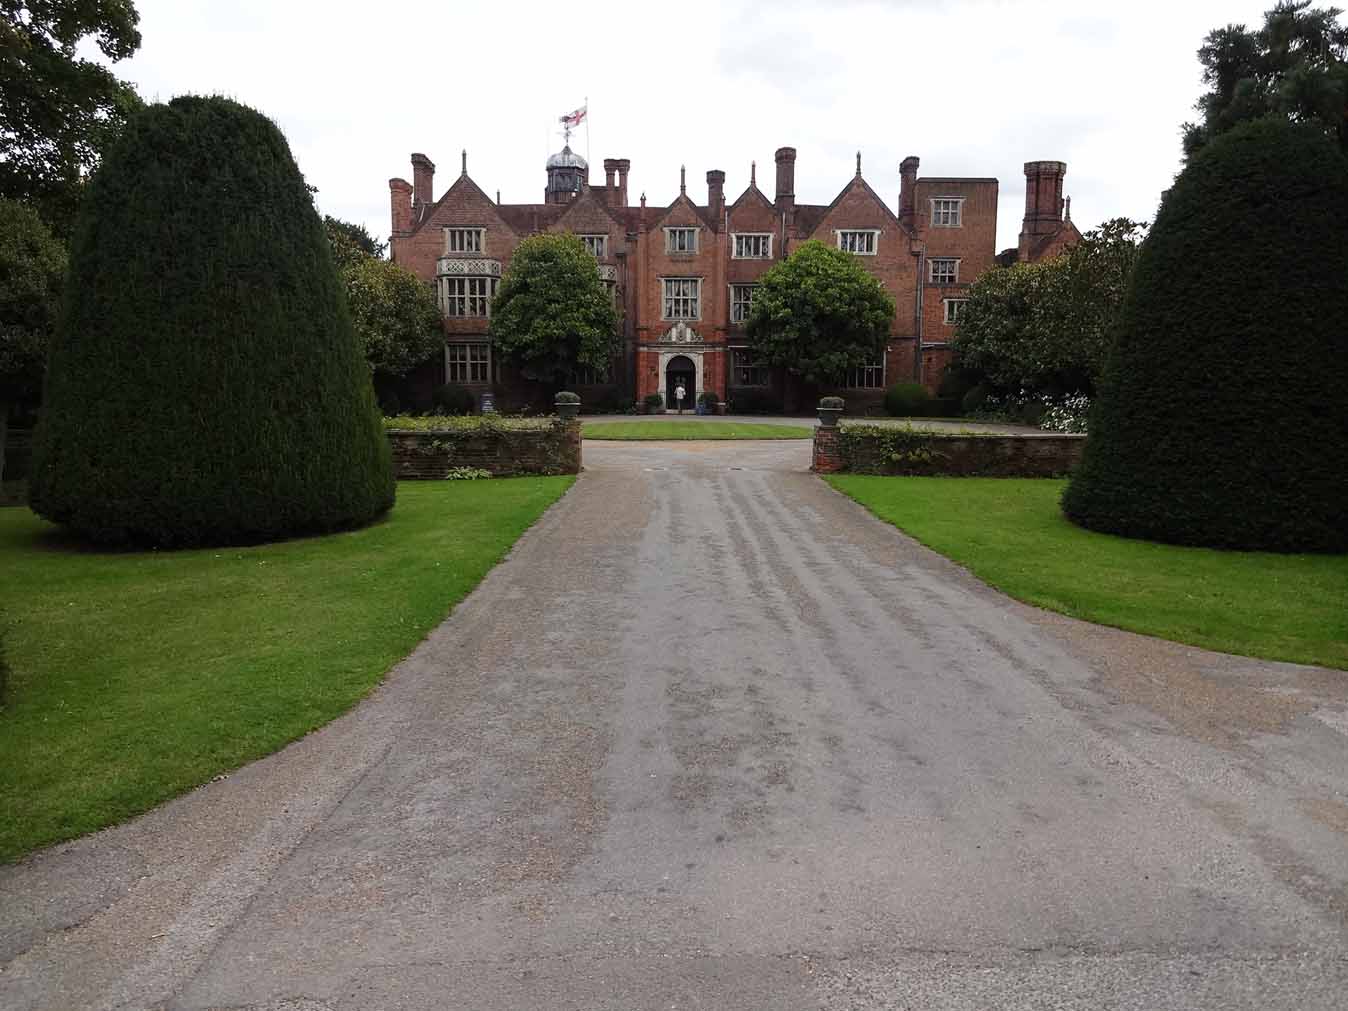 Elegant wedding venue at Great Fosters, showcasing beautifully landscaped gardens and classic architecture, perfect for luxurious weddings.